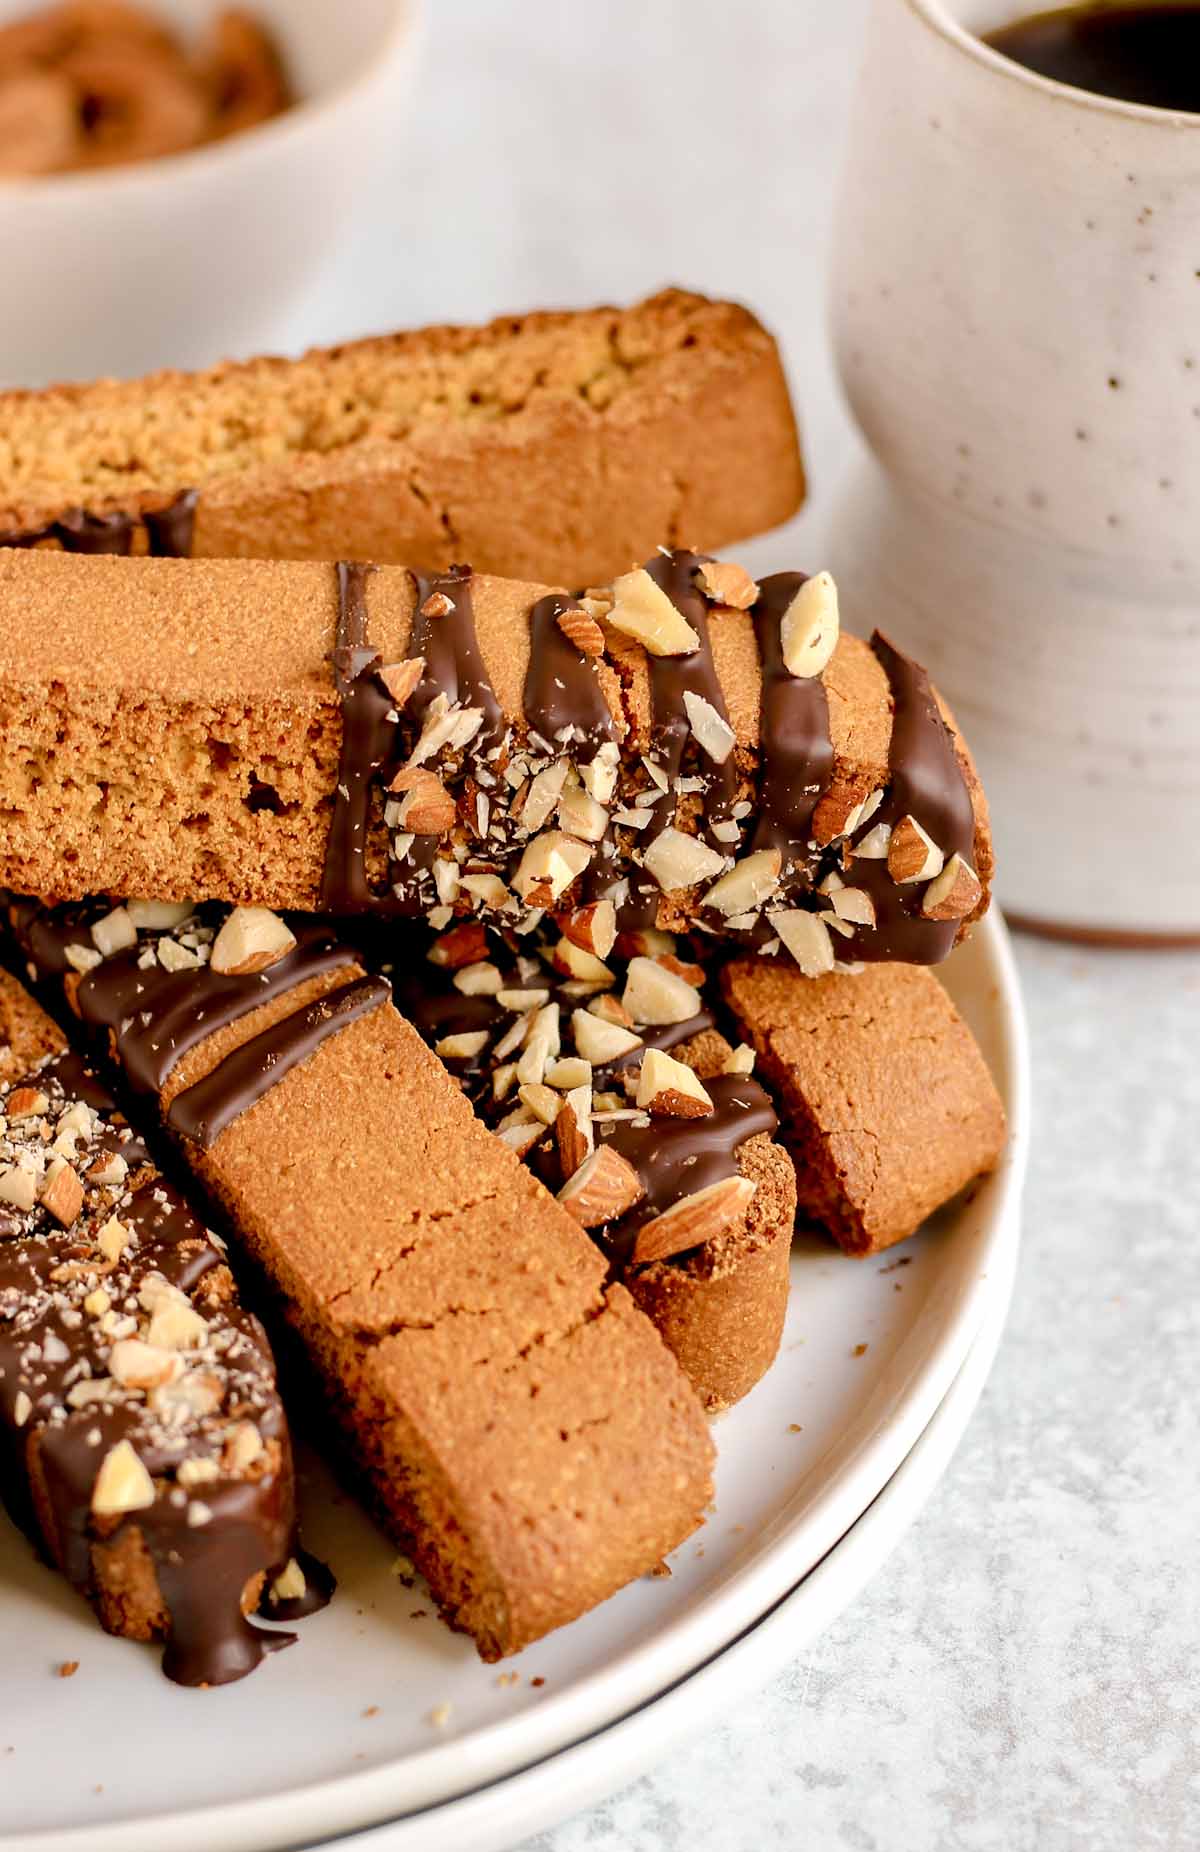 Biscotti drizzled with chocolate and almond pieces stacked on a plate with a cup of coffee in the background.